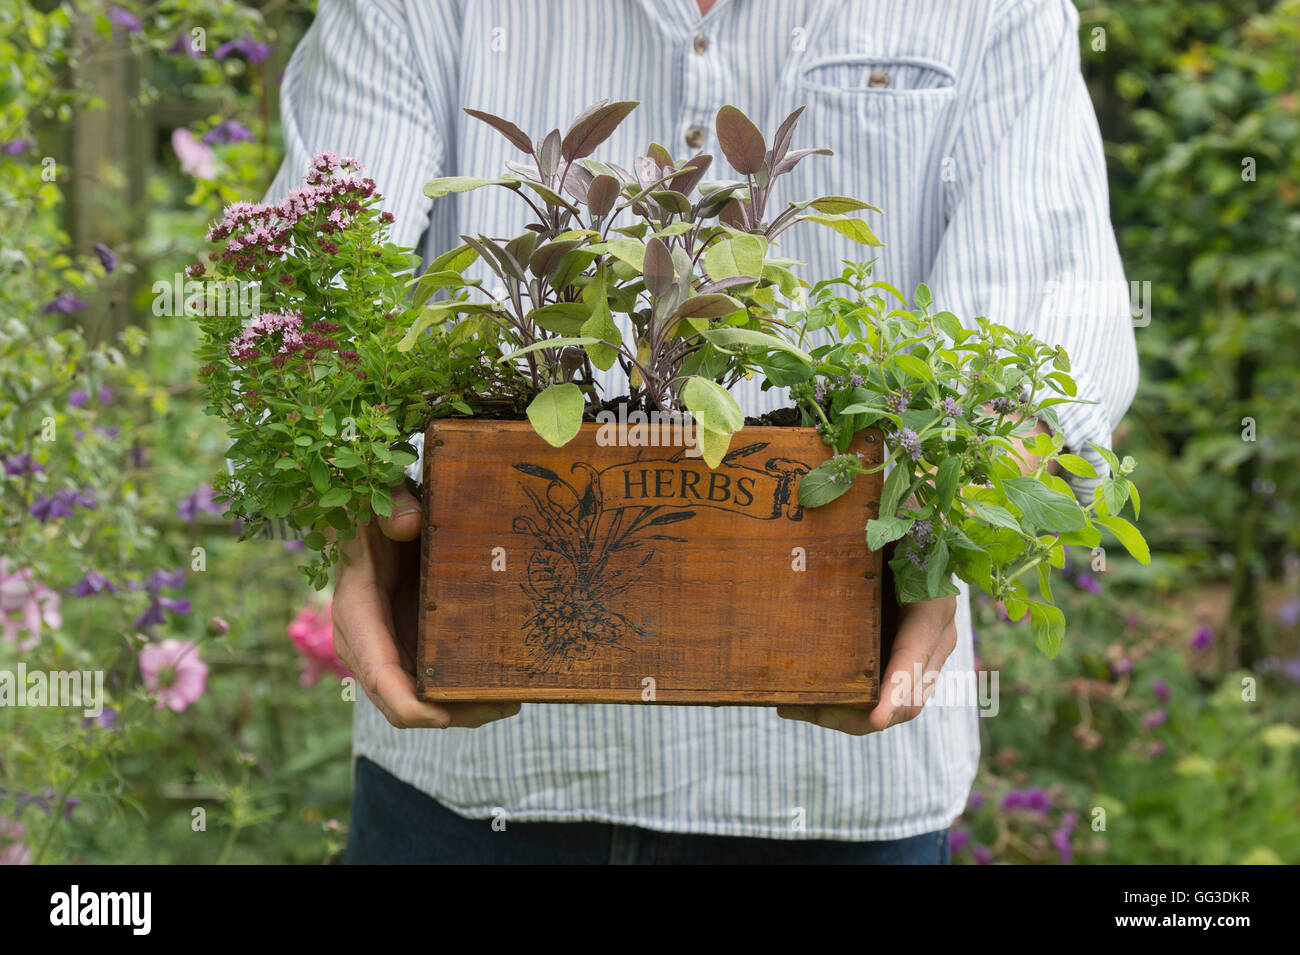 Gardener holding a wooden herb planter containing banana mint, purple sage and compact marjoram Stock Photo